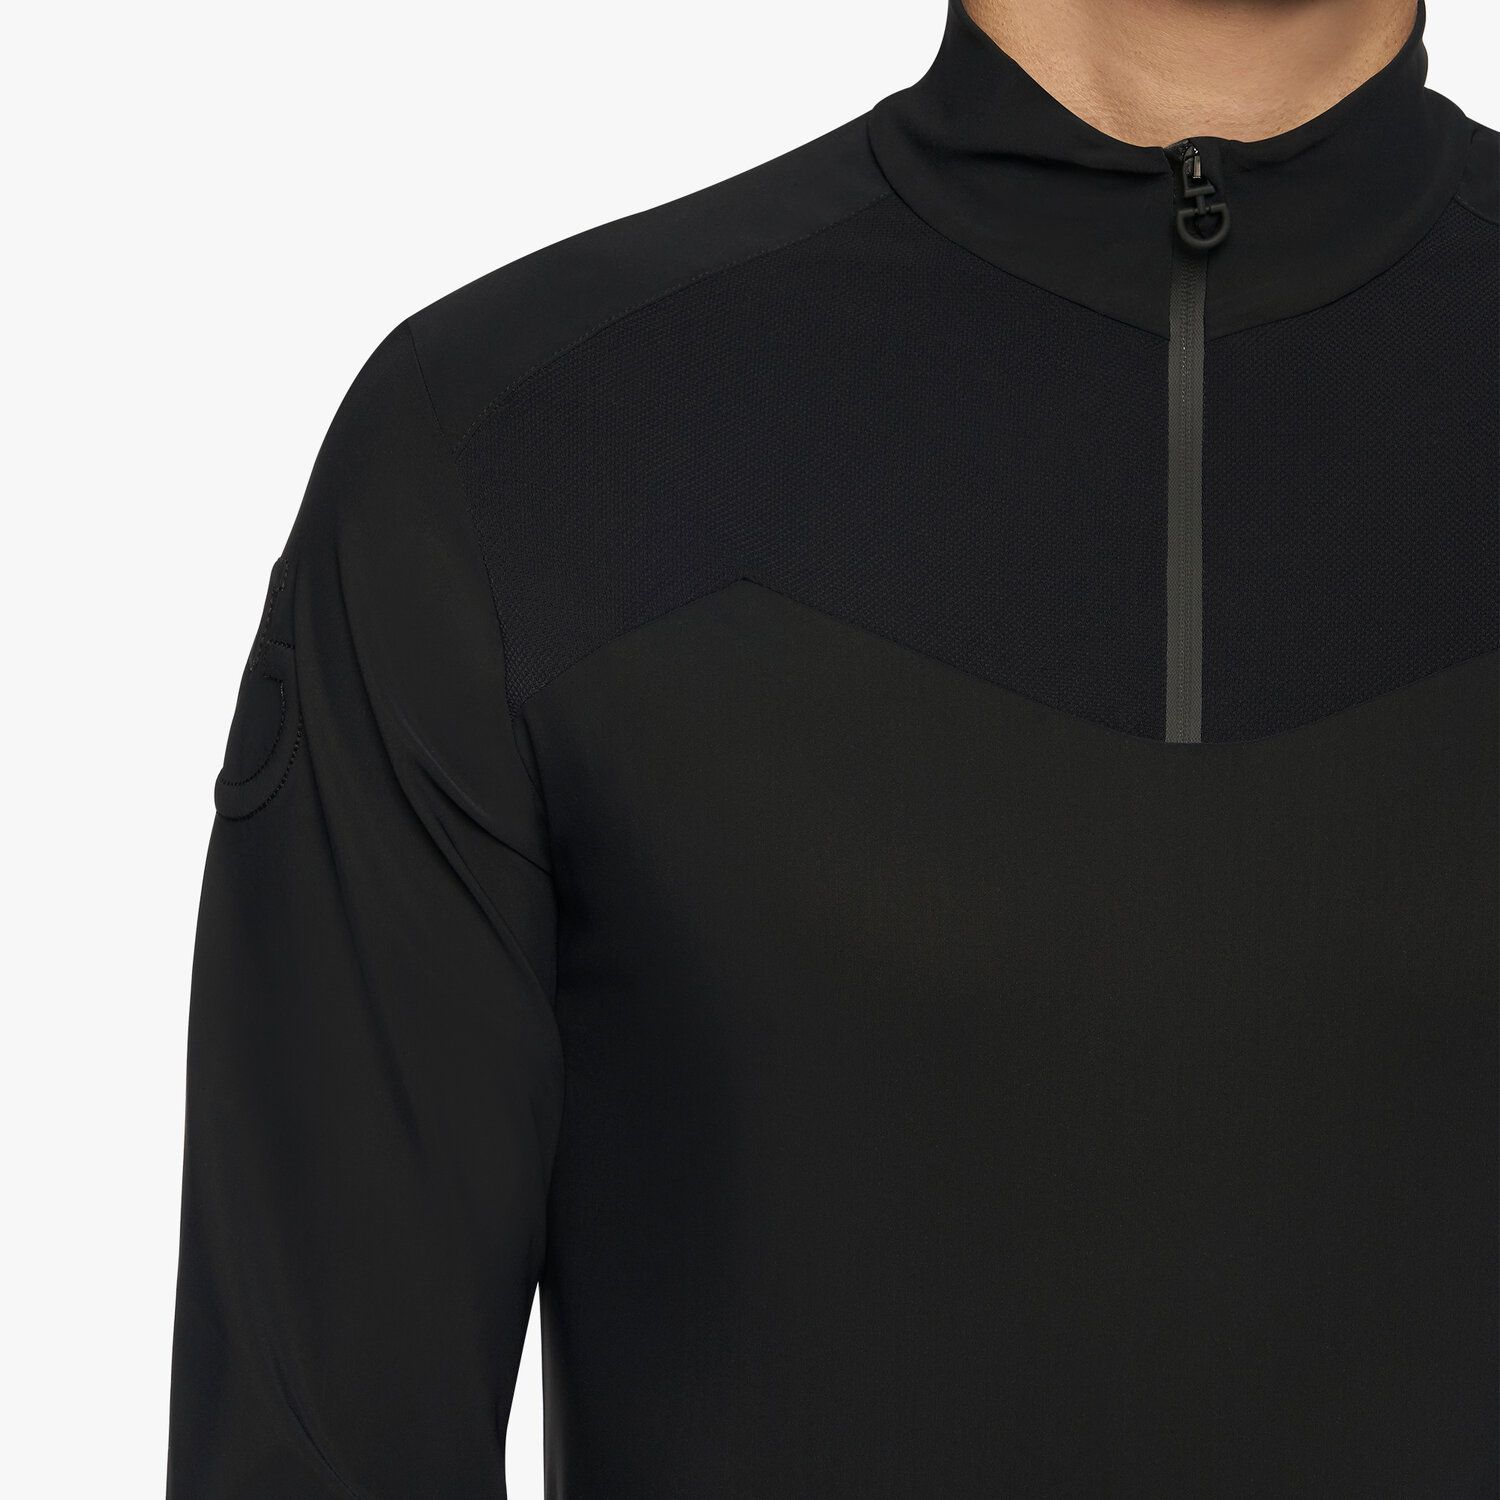 Cavalleria Toscana Men’s performance jersey base layer with a zip BLACK-5